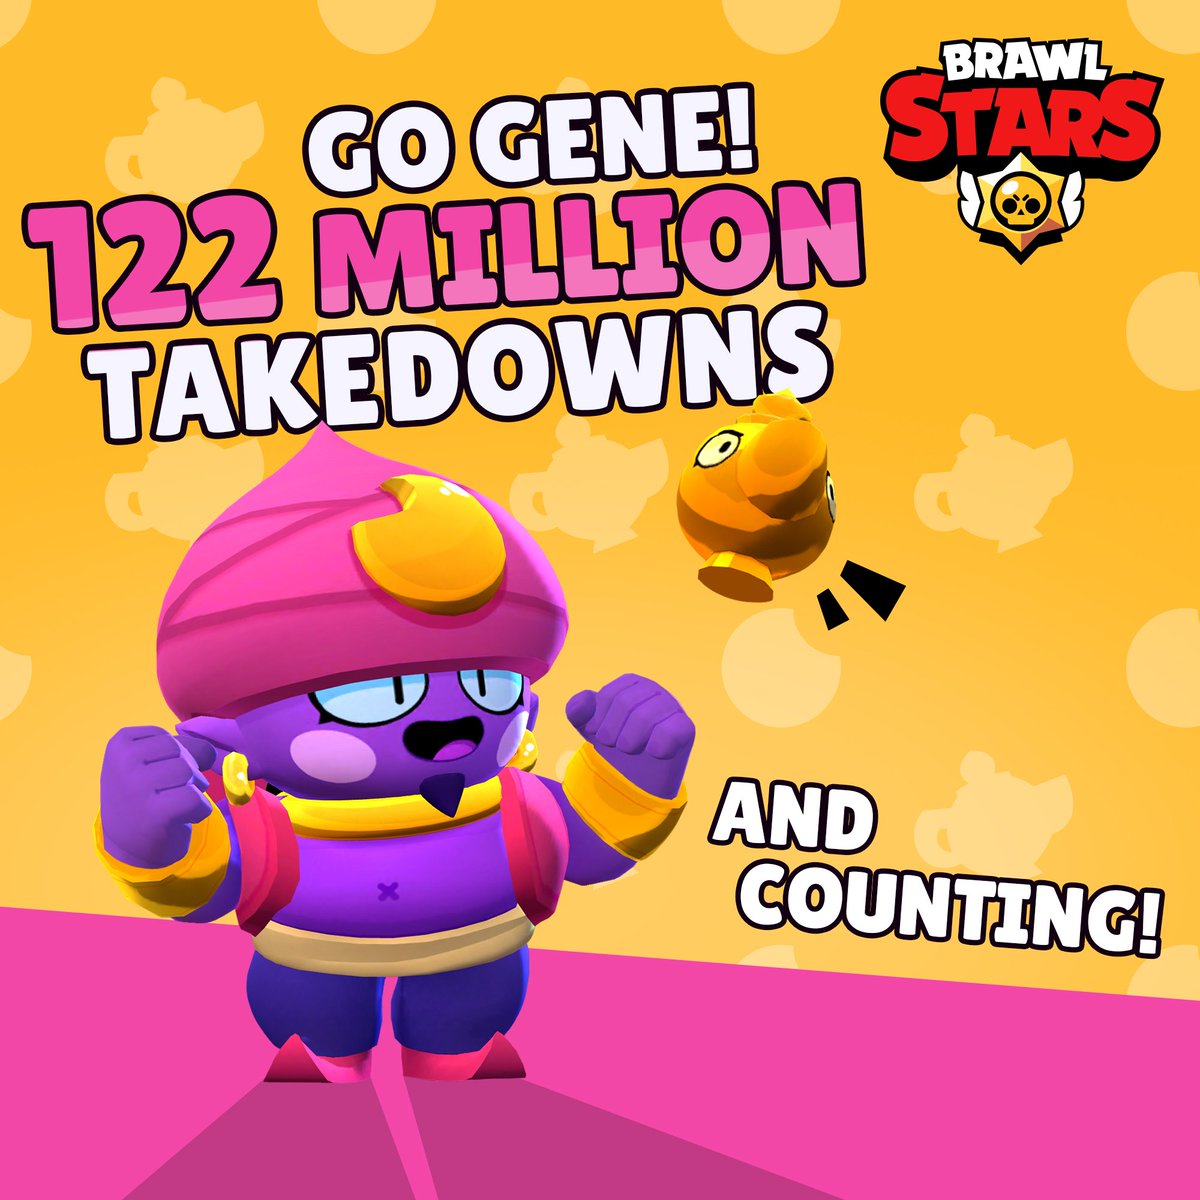 When Is Gene Coming Out In Brawl Stars